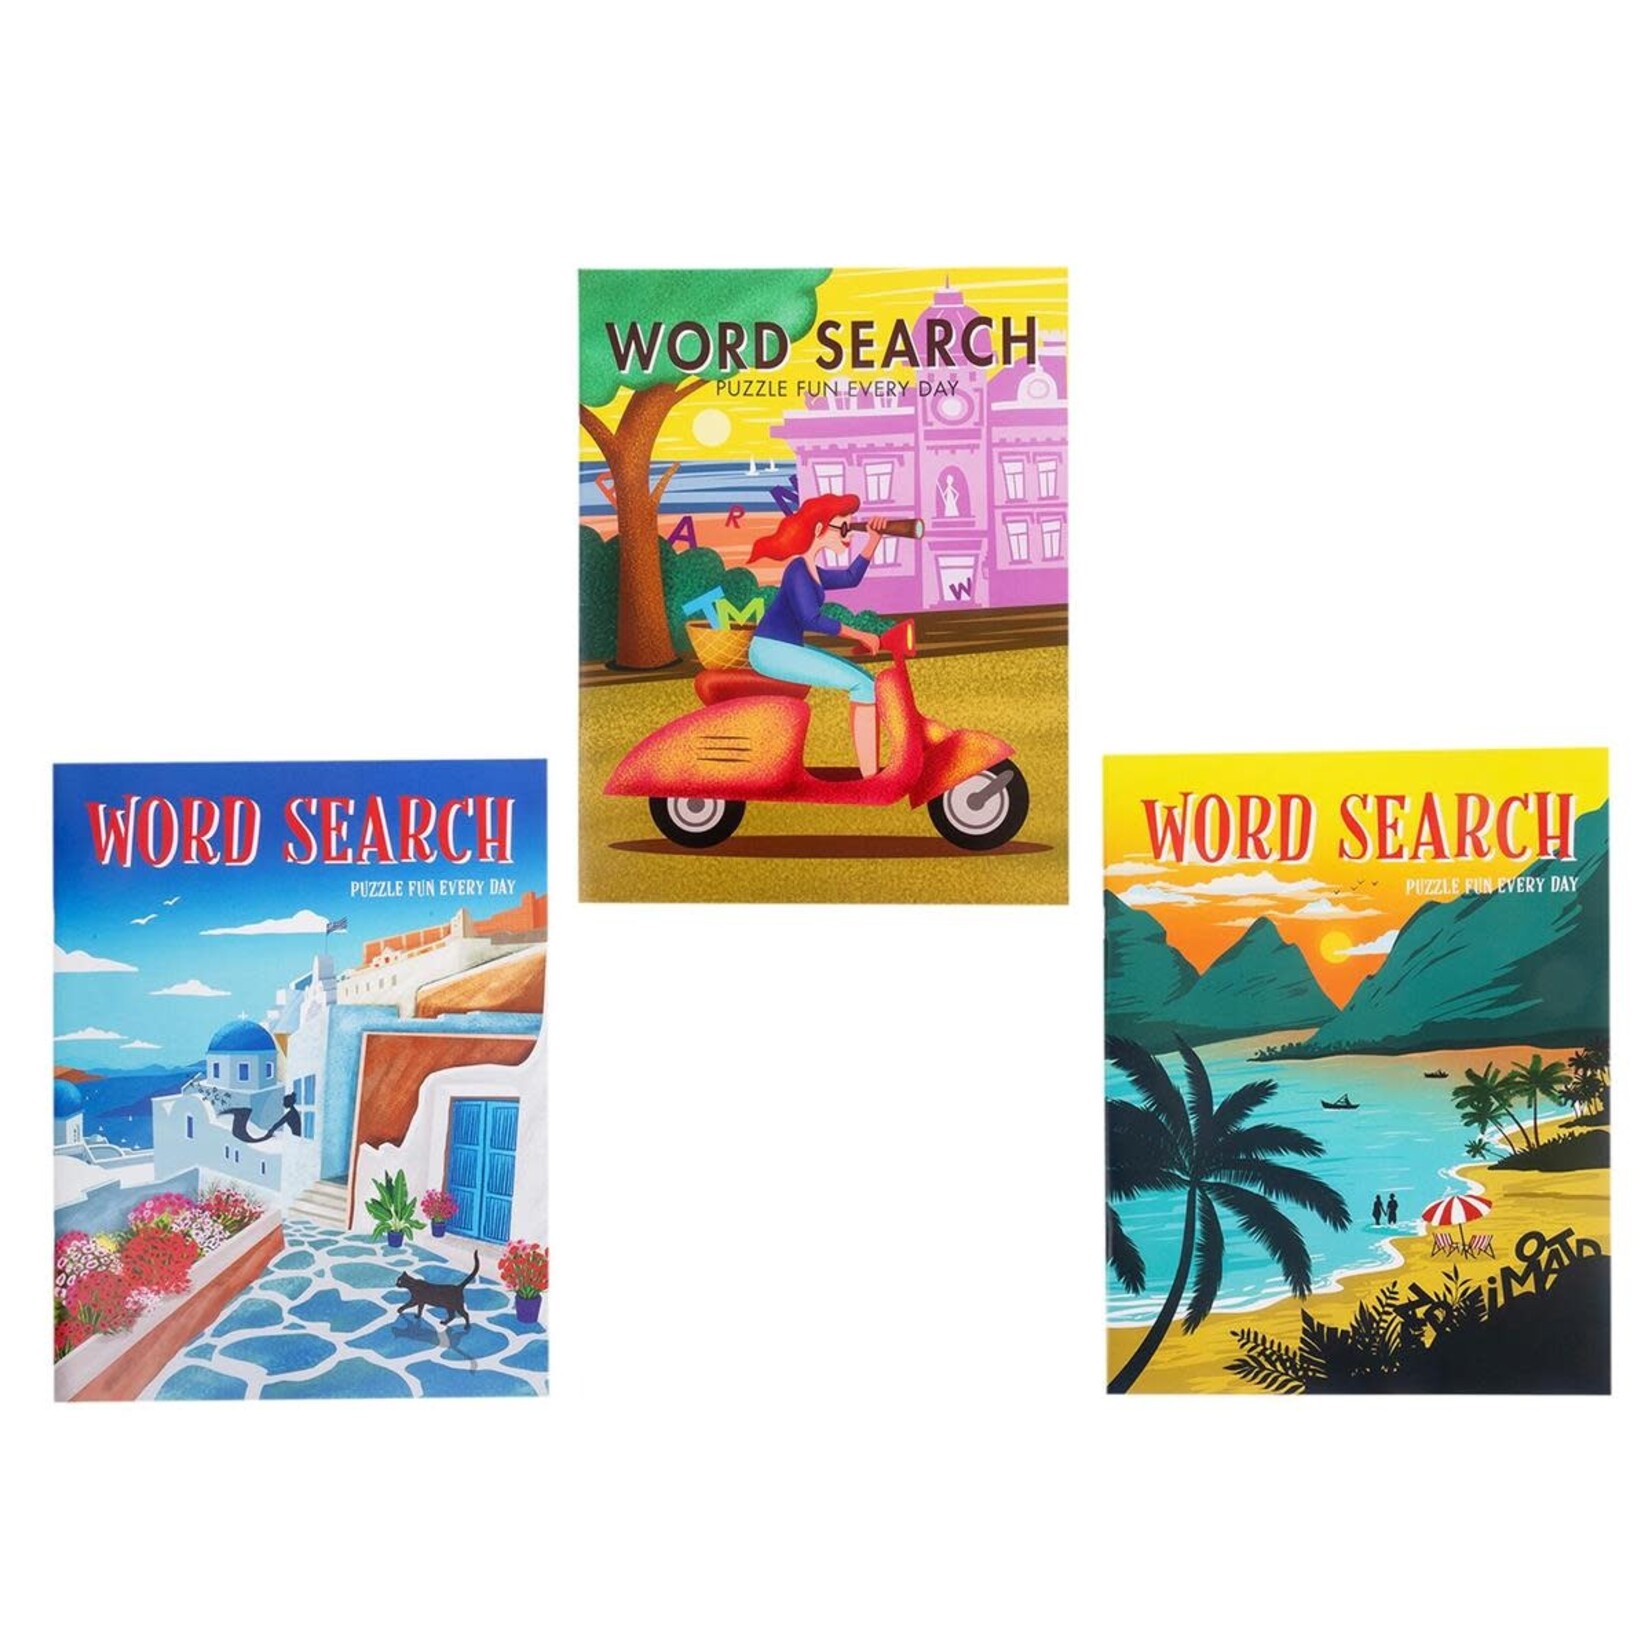 LARGE PRINT WORDSEARCH PUZZLE BOOK